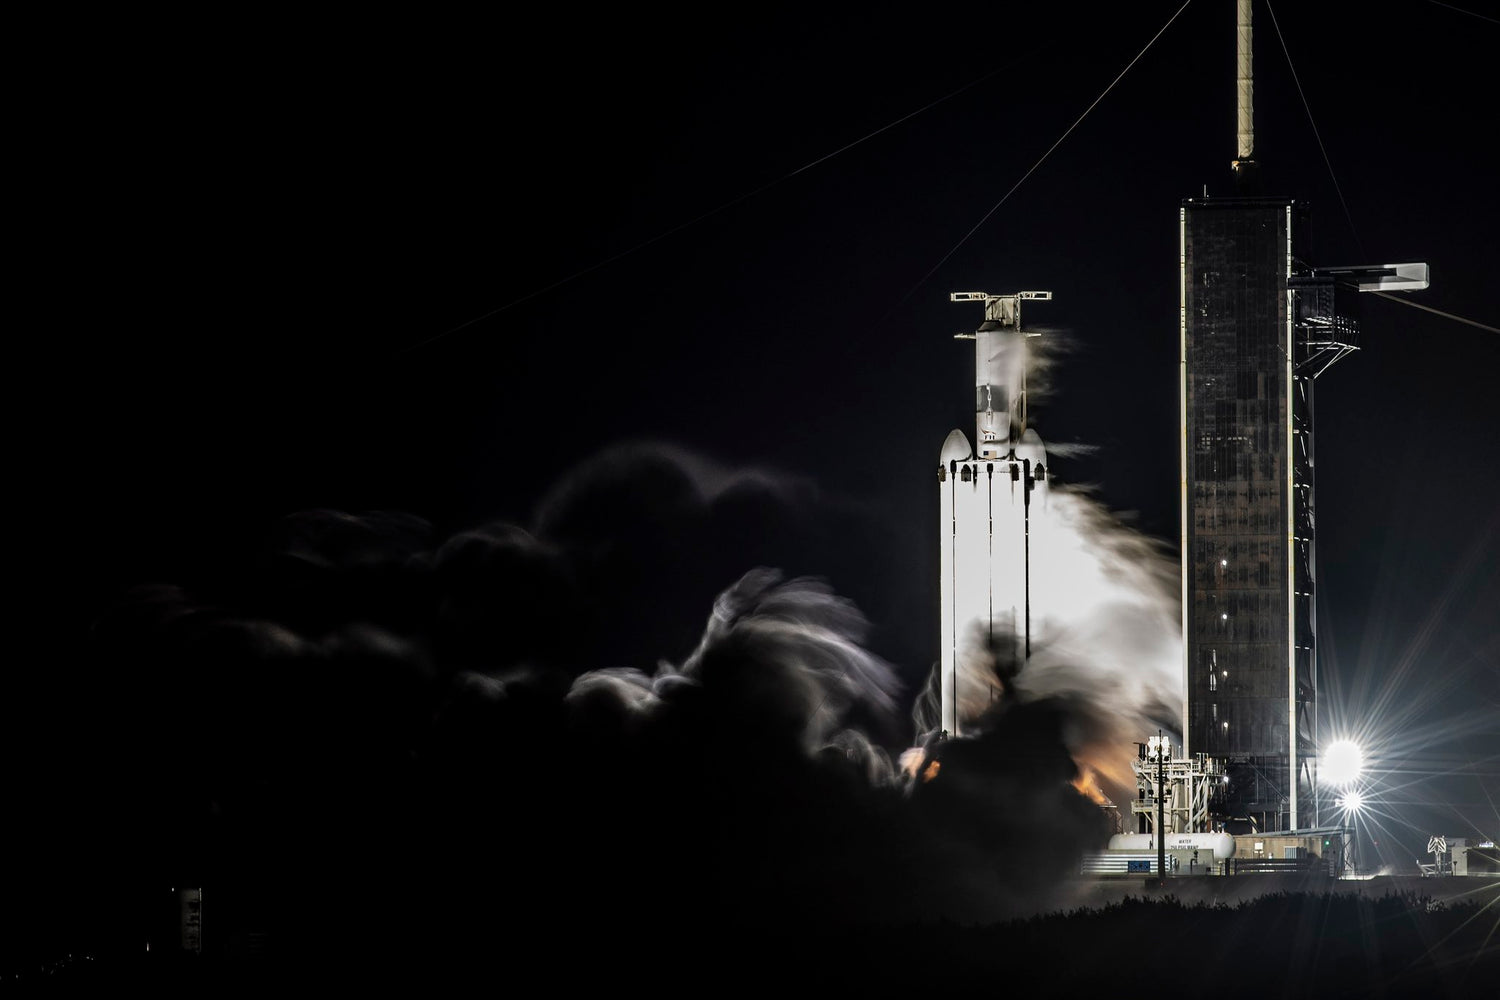 SpaceX’s Falcon Heavy rocket roared to life for the first time in over three years during a static-fire test